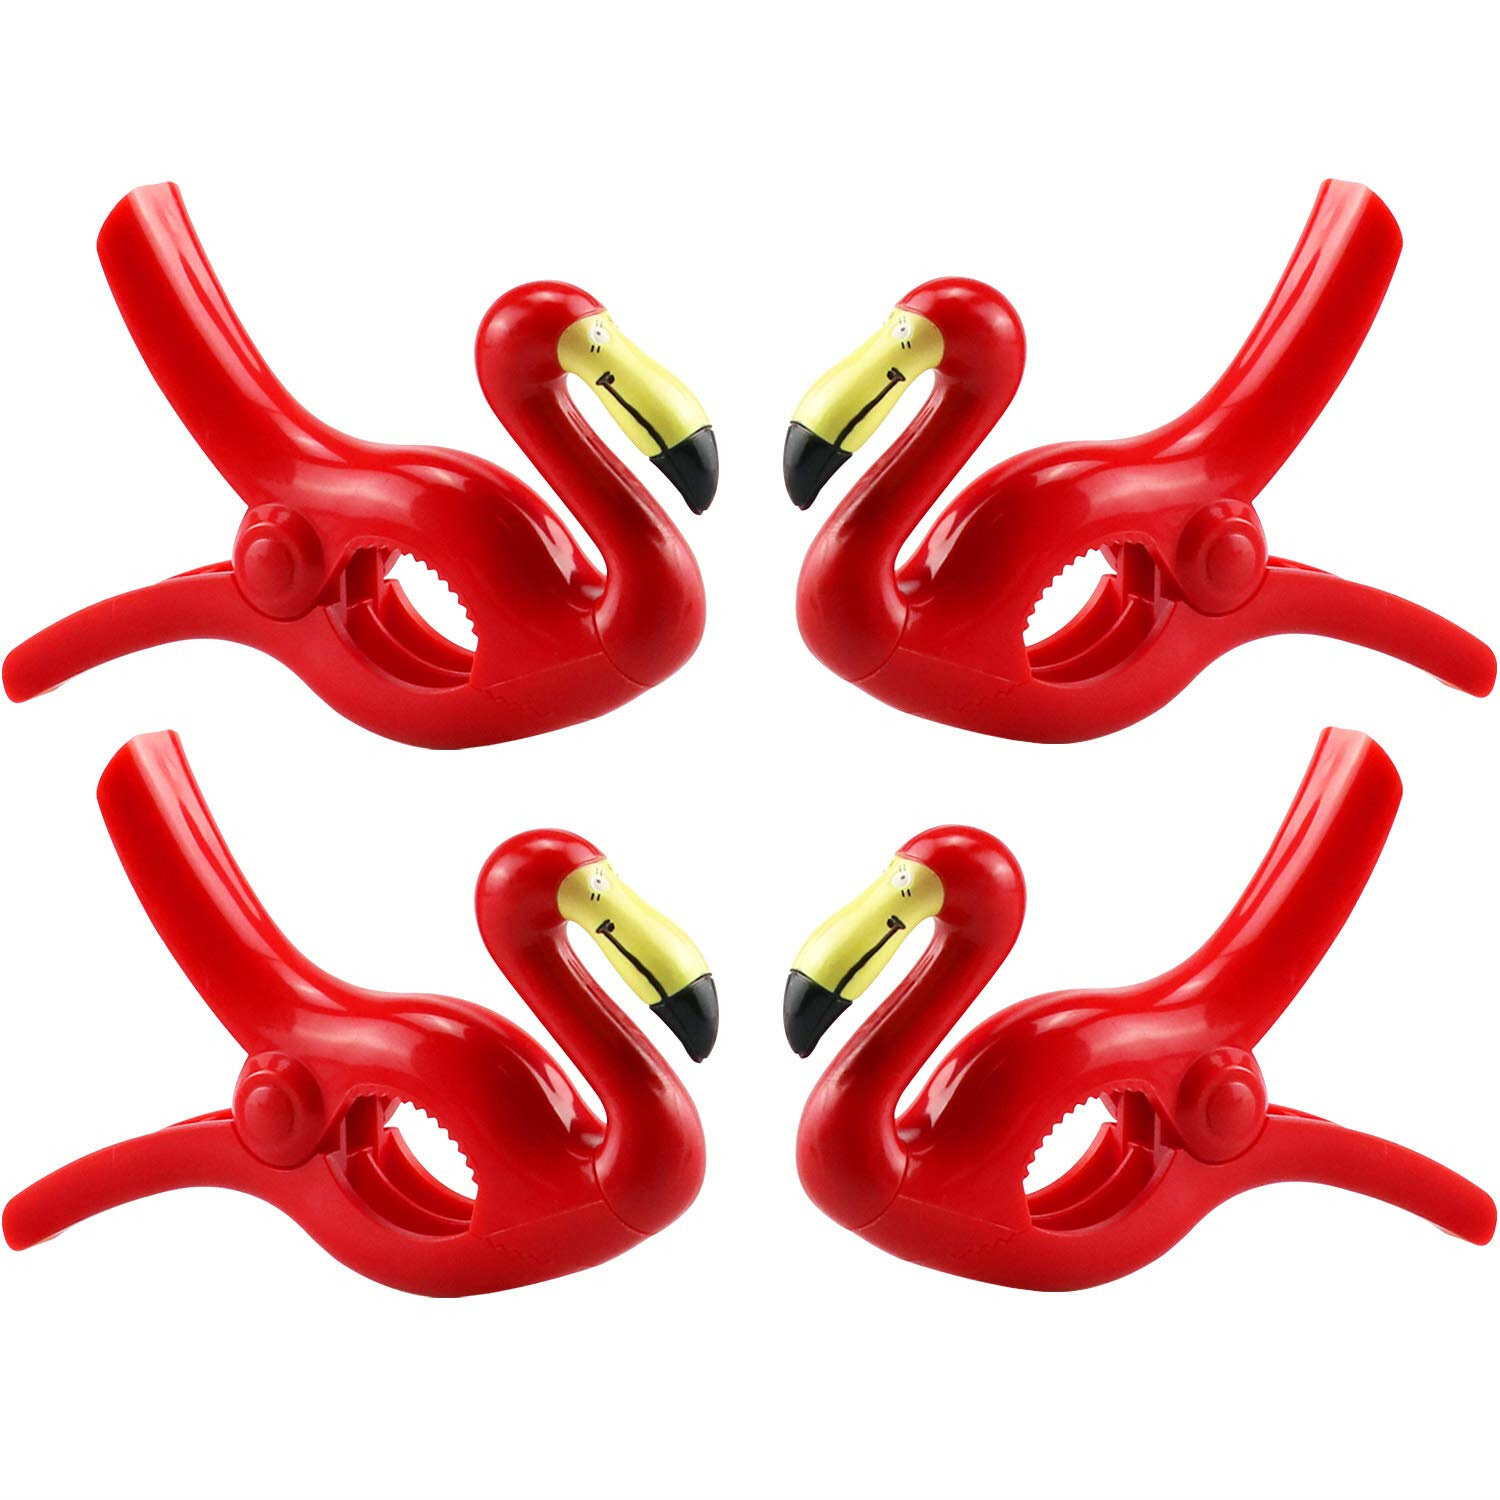 4 Pieces Beach Flamingo Towel Clips Flamingo Chair Holders Portable Parrot Towel Holders for Holiday Pool